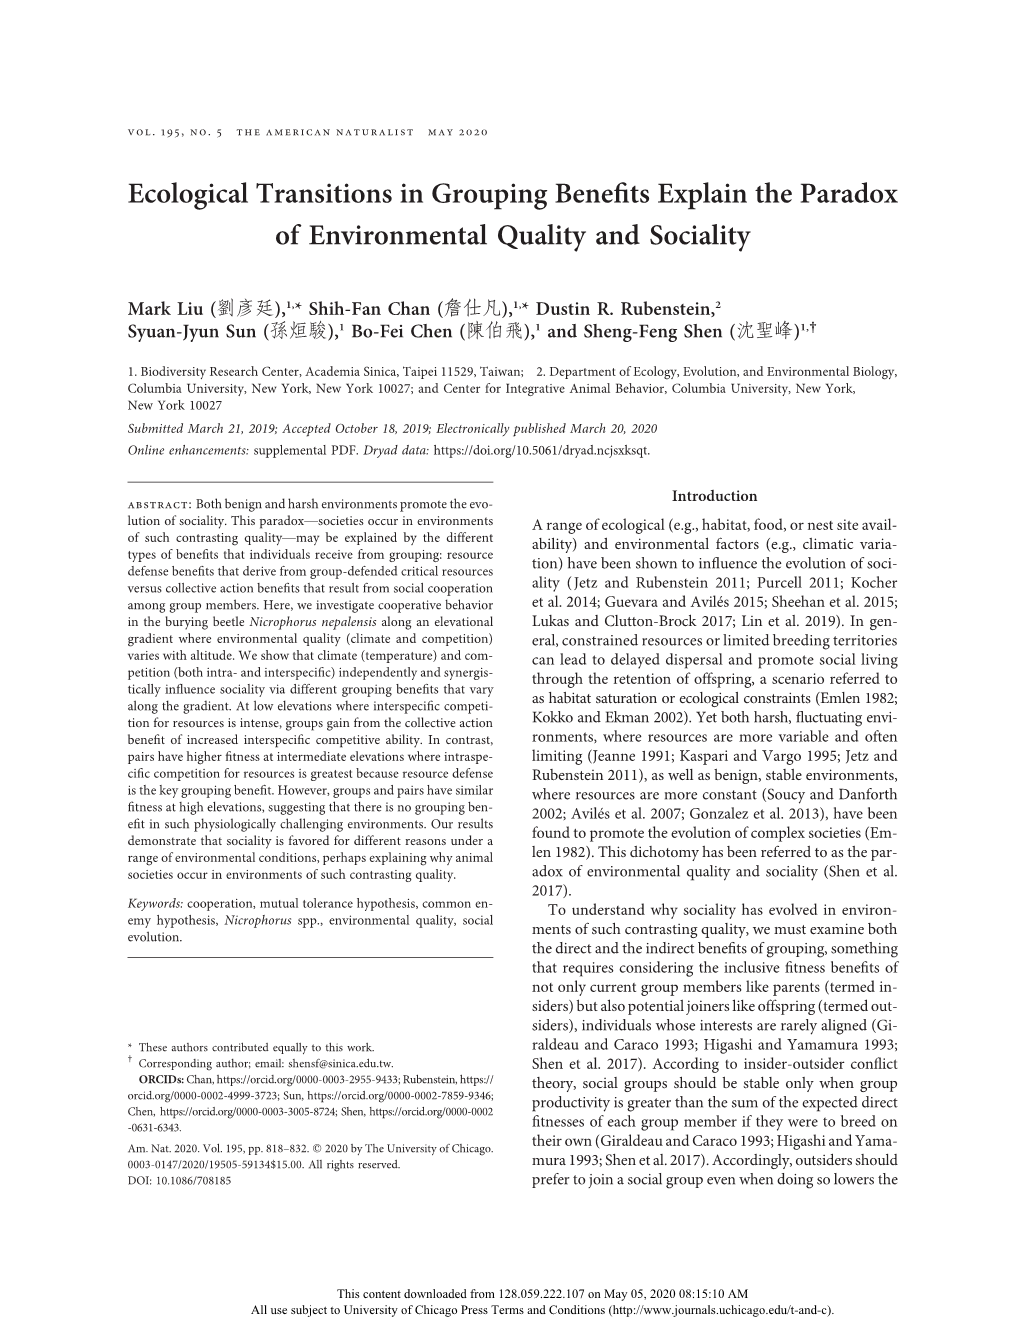 Ecological Transitions in Grouping Benefits Explain the Paradox Of